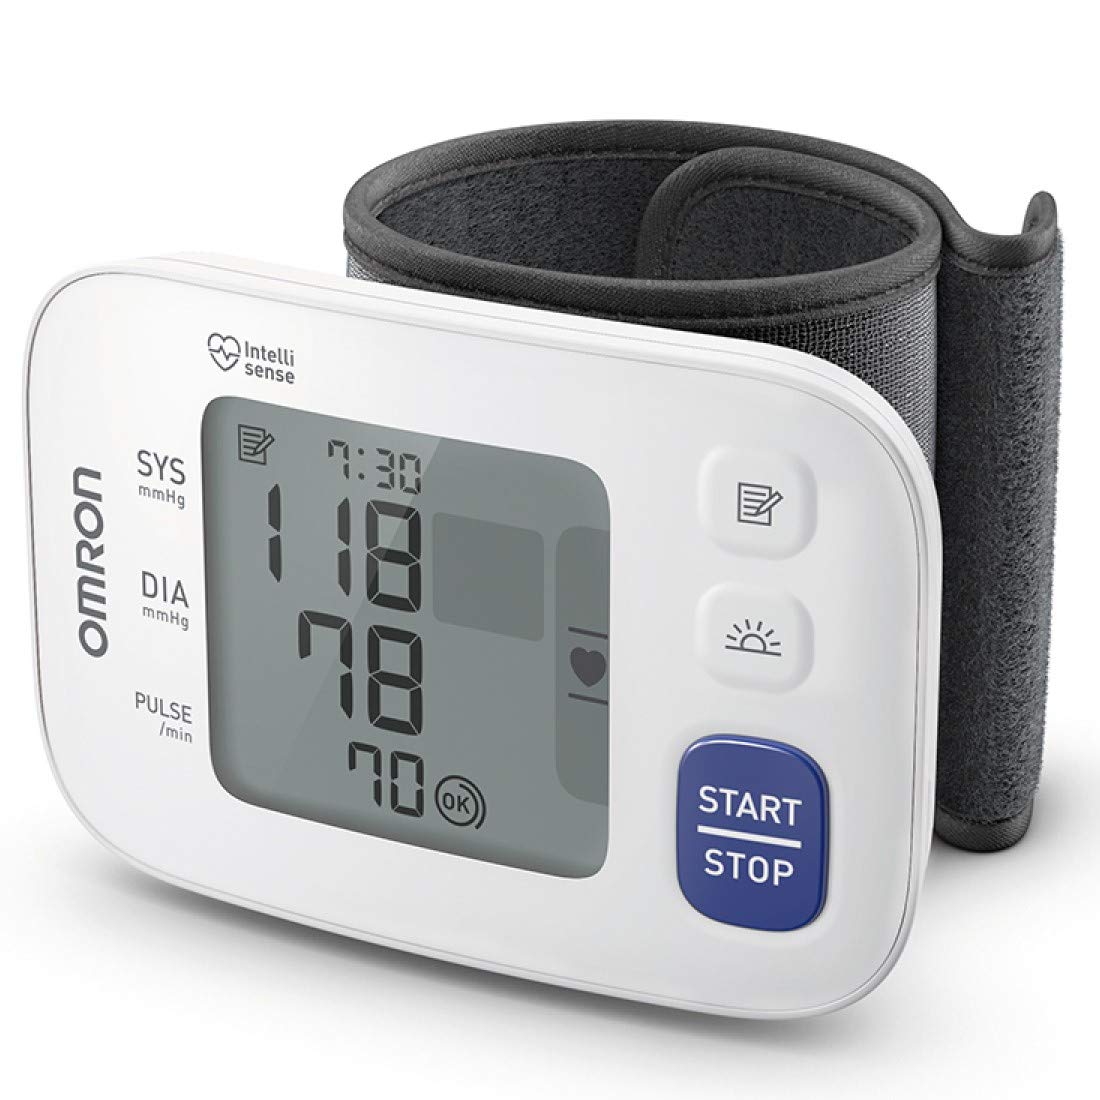 Omron HEM 6181 Fully Automatic Wrist Blood Pressure Monitor with Intelligence Technology, Cuff Wrapping Guide and Irregular Heartbeat Detection for Most Accurate Measurement (White)